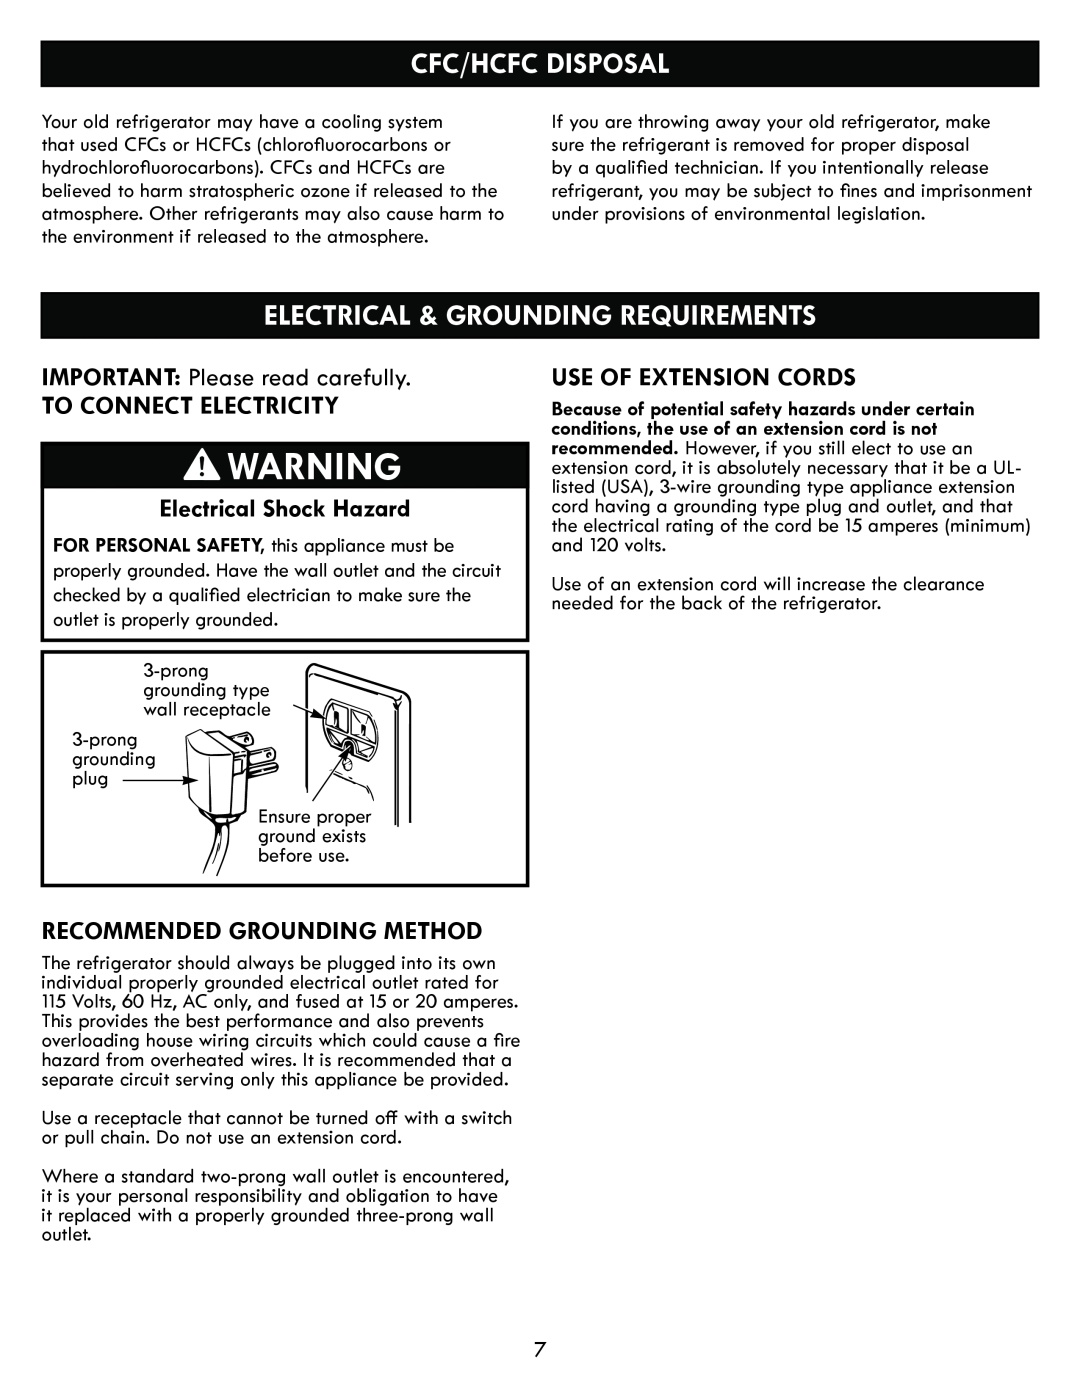 Kenmore kenmore Cfc/Hcfc Disposal, Electrical & Grounding Requirements, To Connect Electricity, Electrical Shock Hazard 